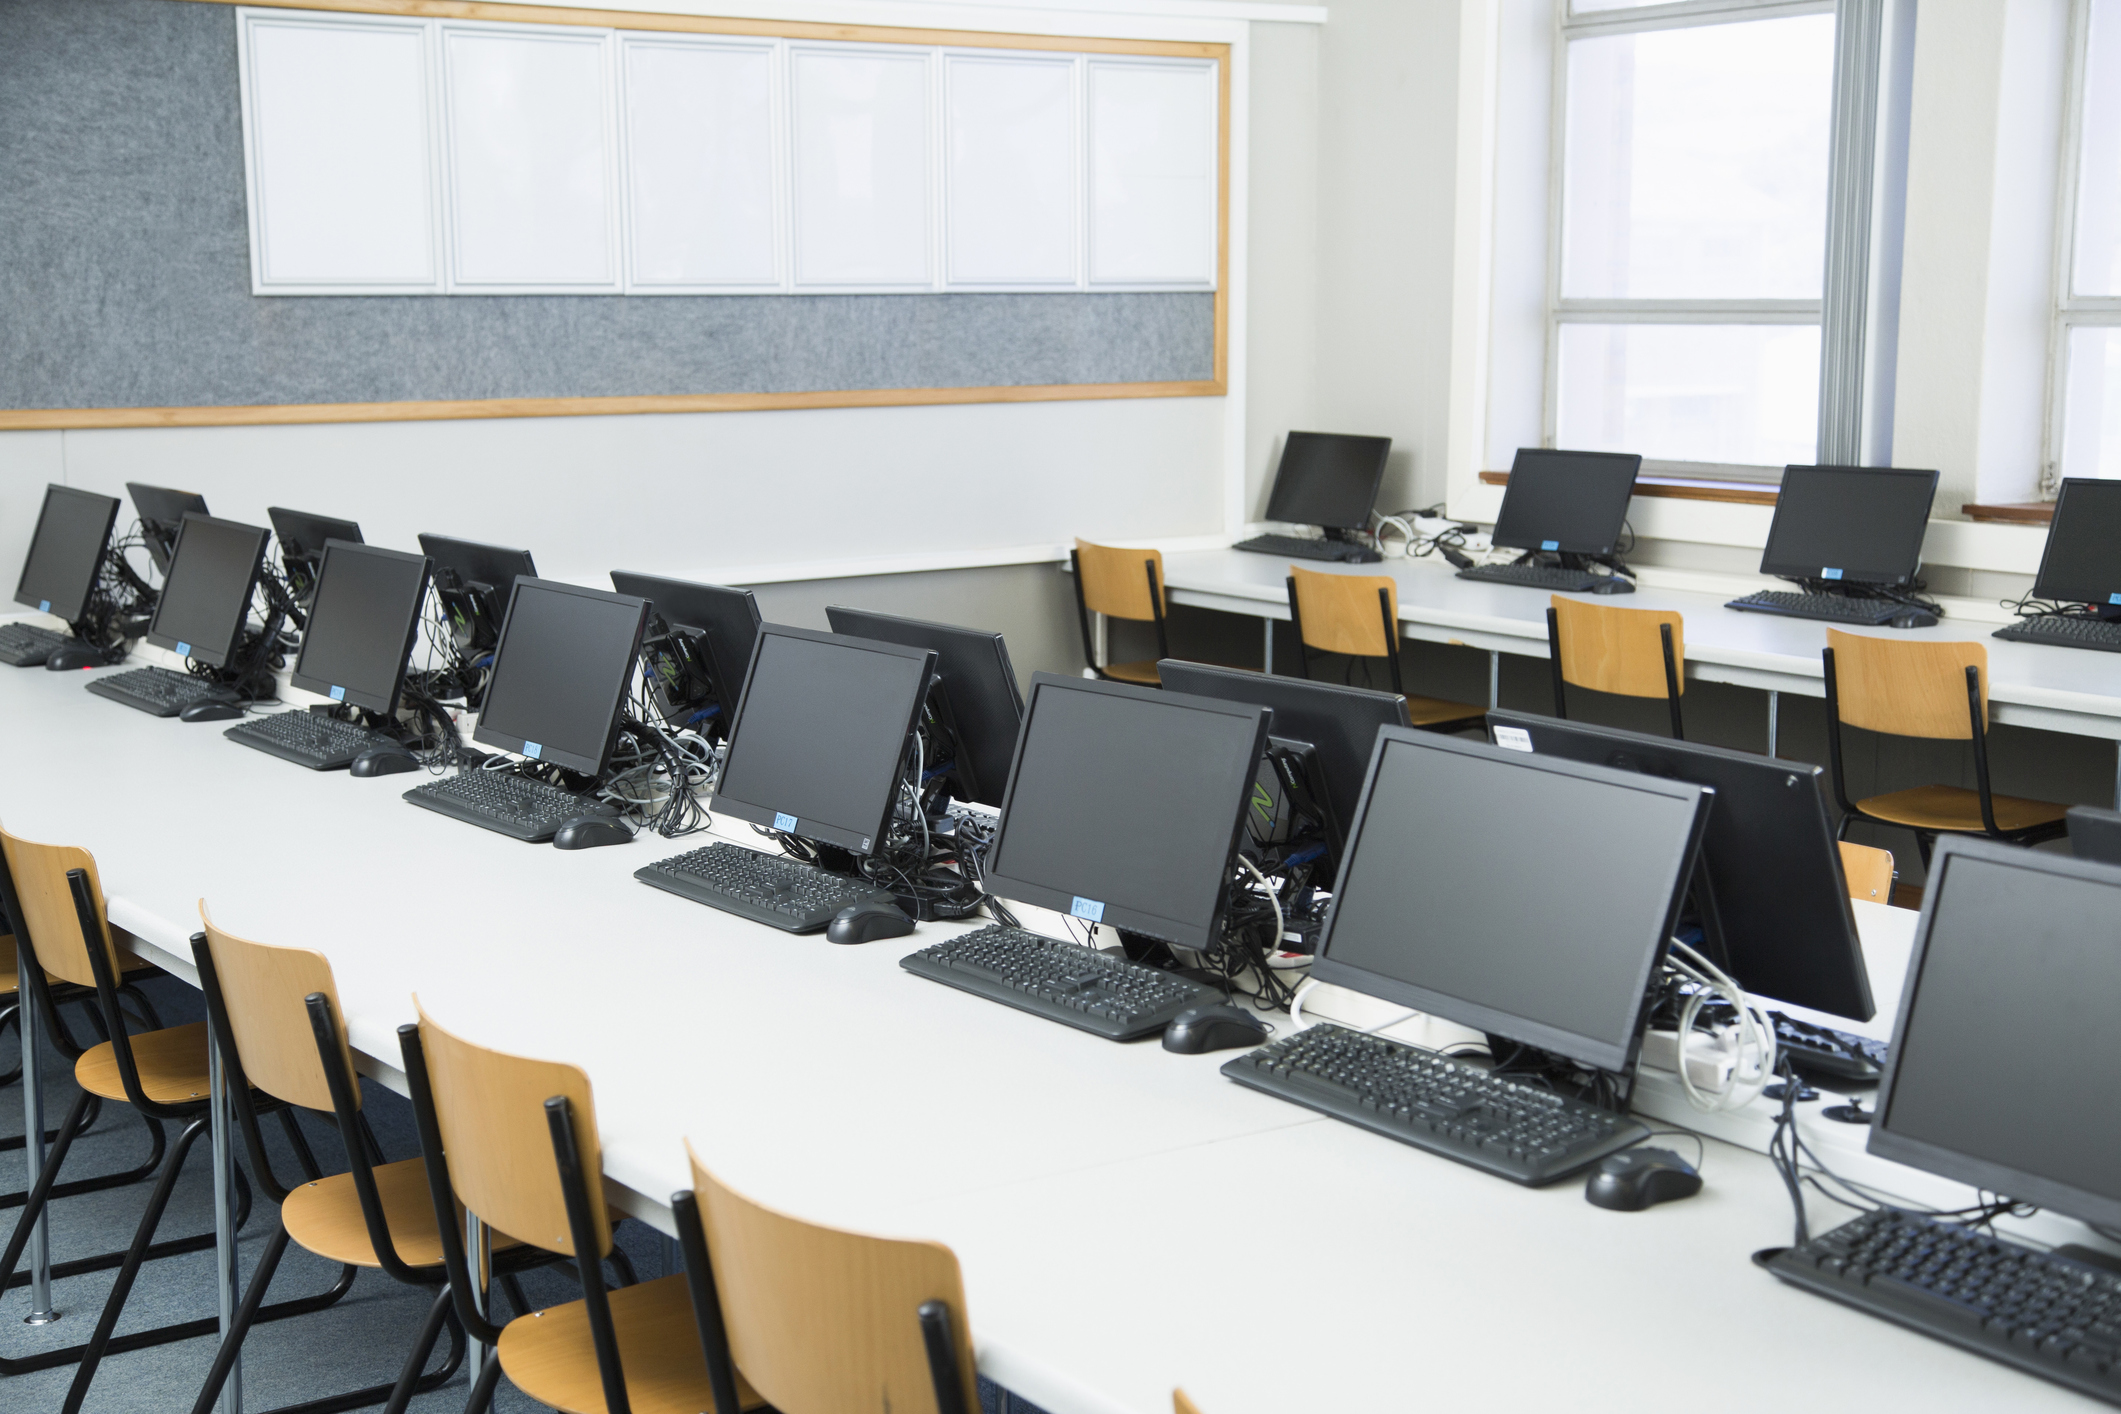 PHOTO: Empty classroom with rows of personal computers on desk pictured in this undated stock photo.